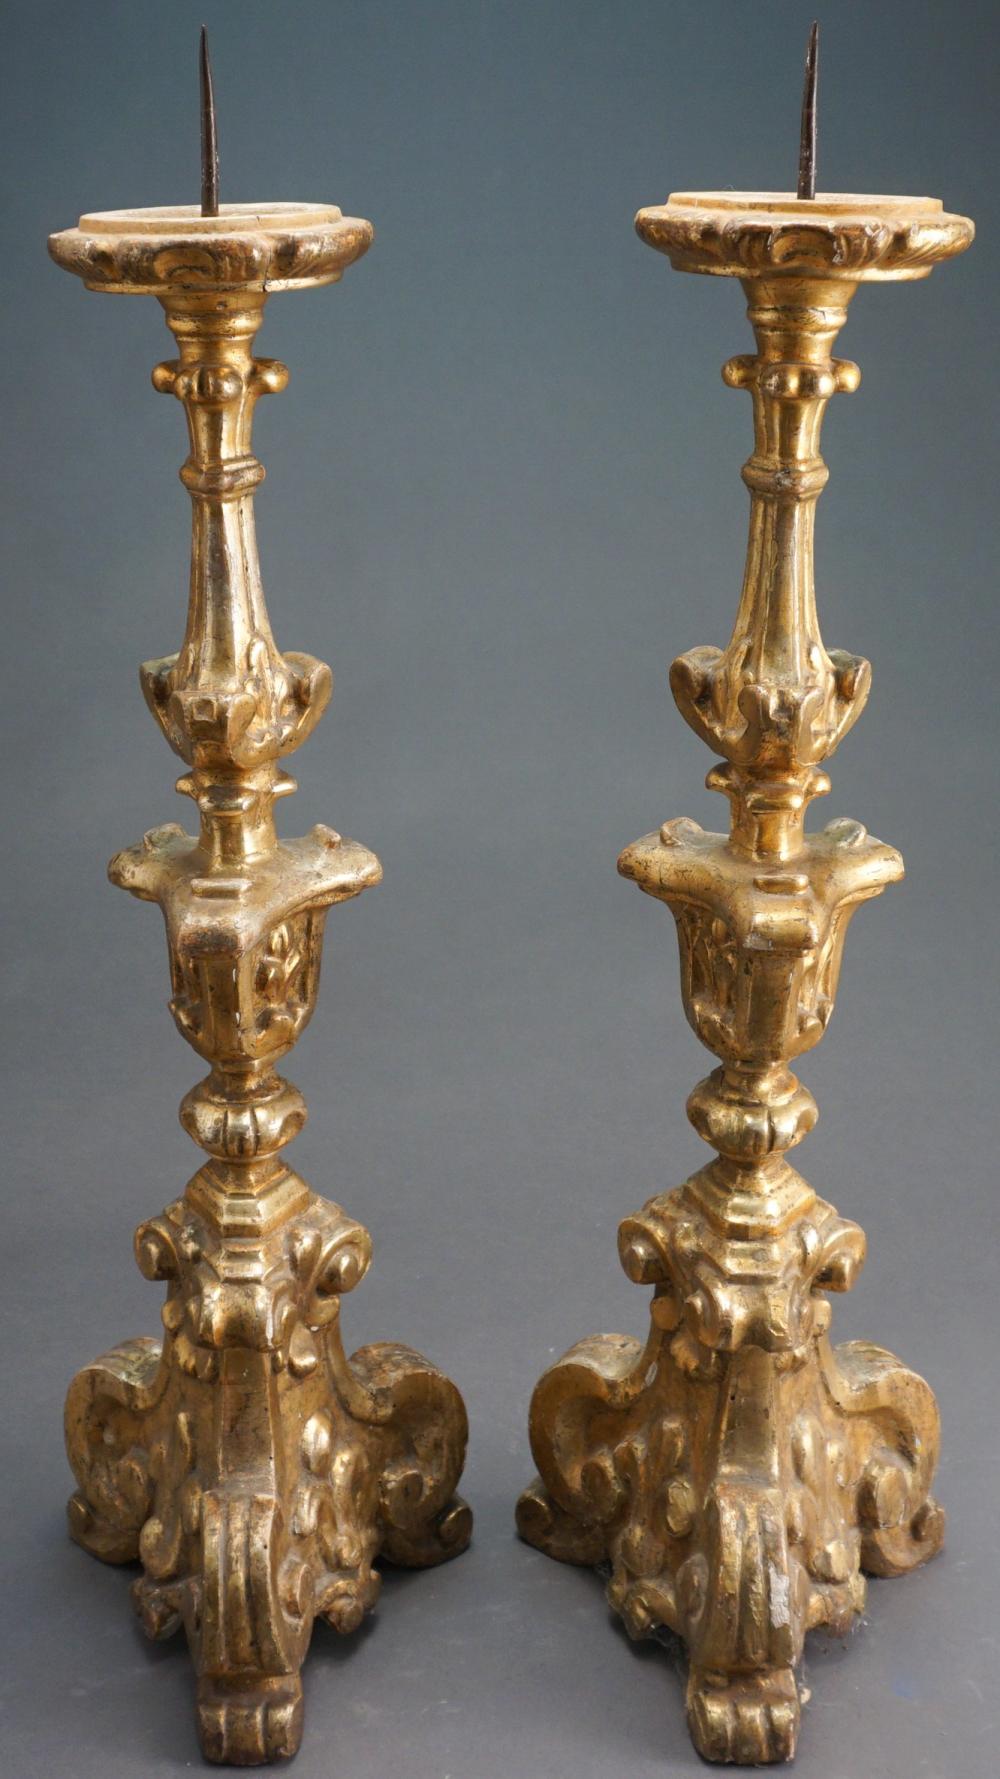 PAIR OF BAROQUE STYLE GILTWOOD 32a3ea